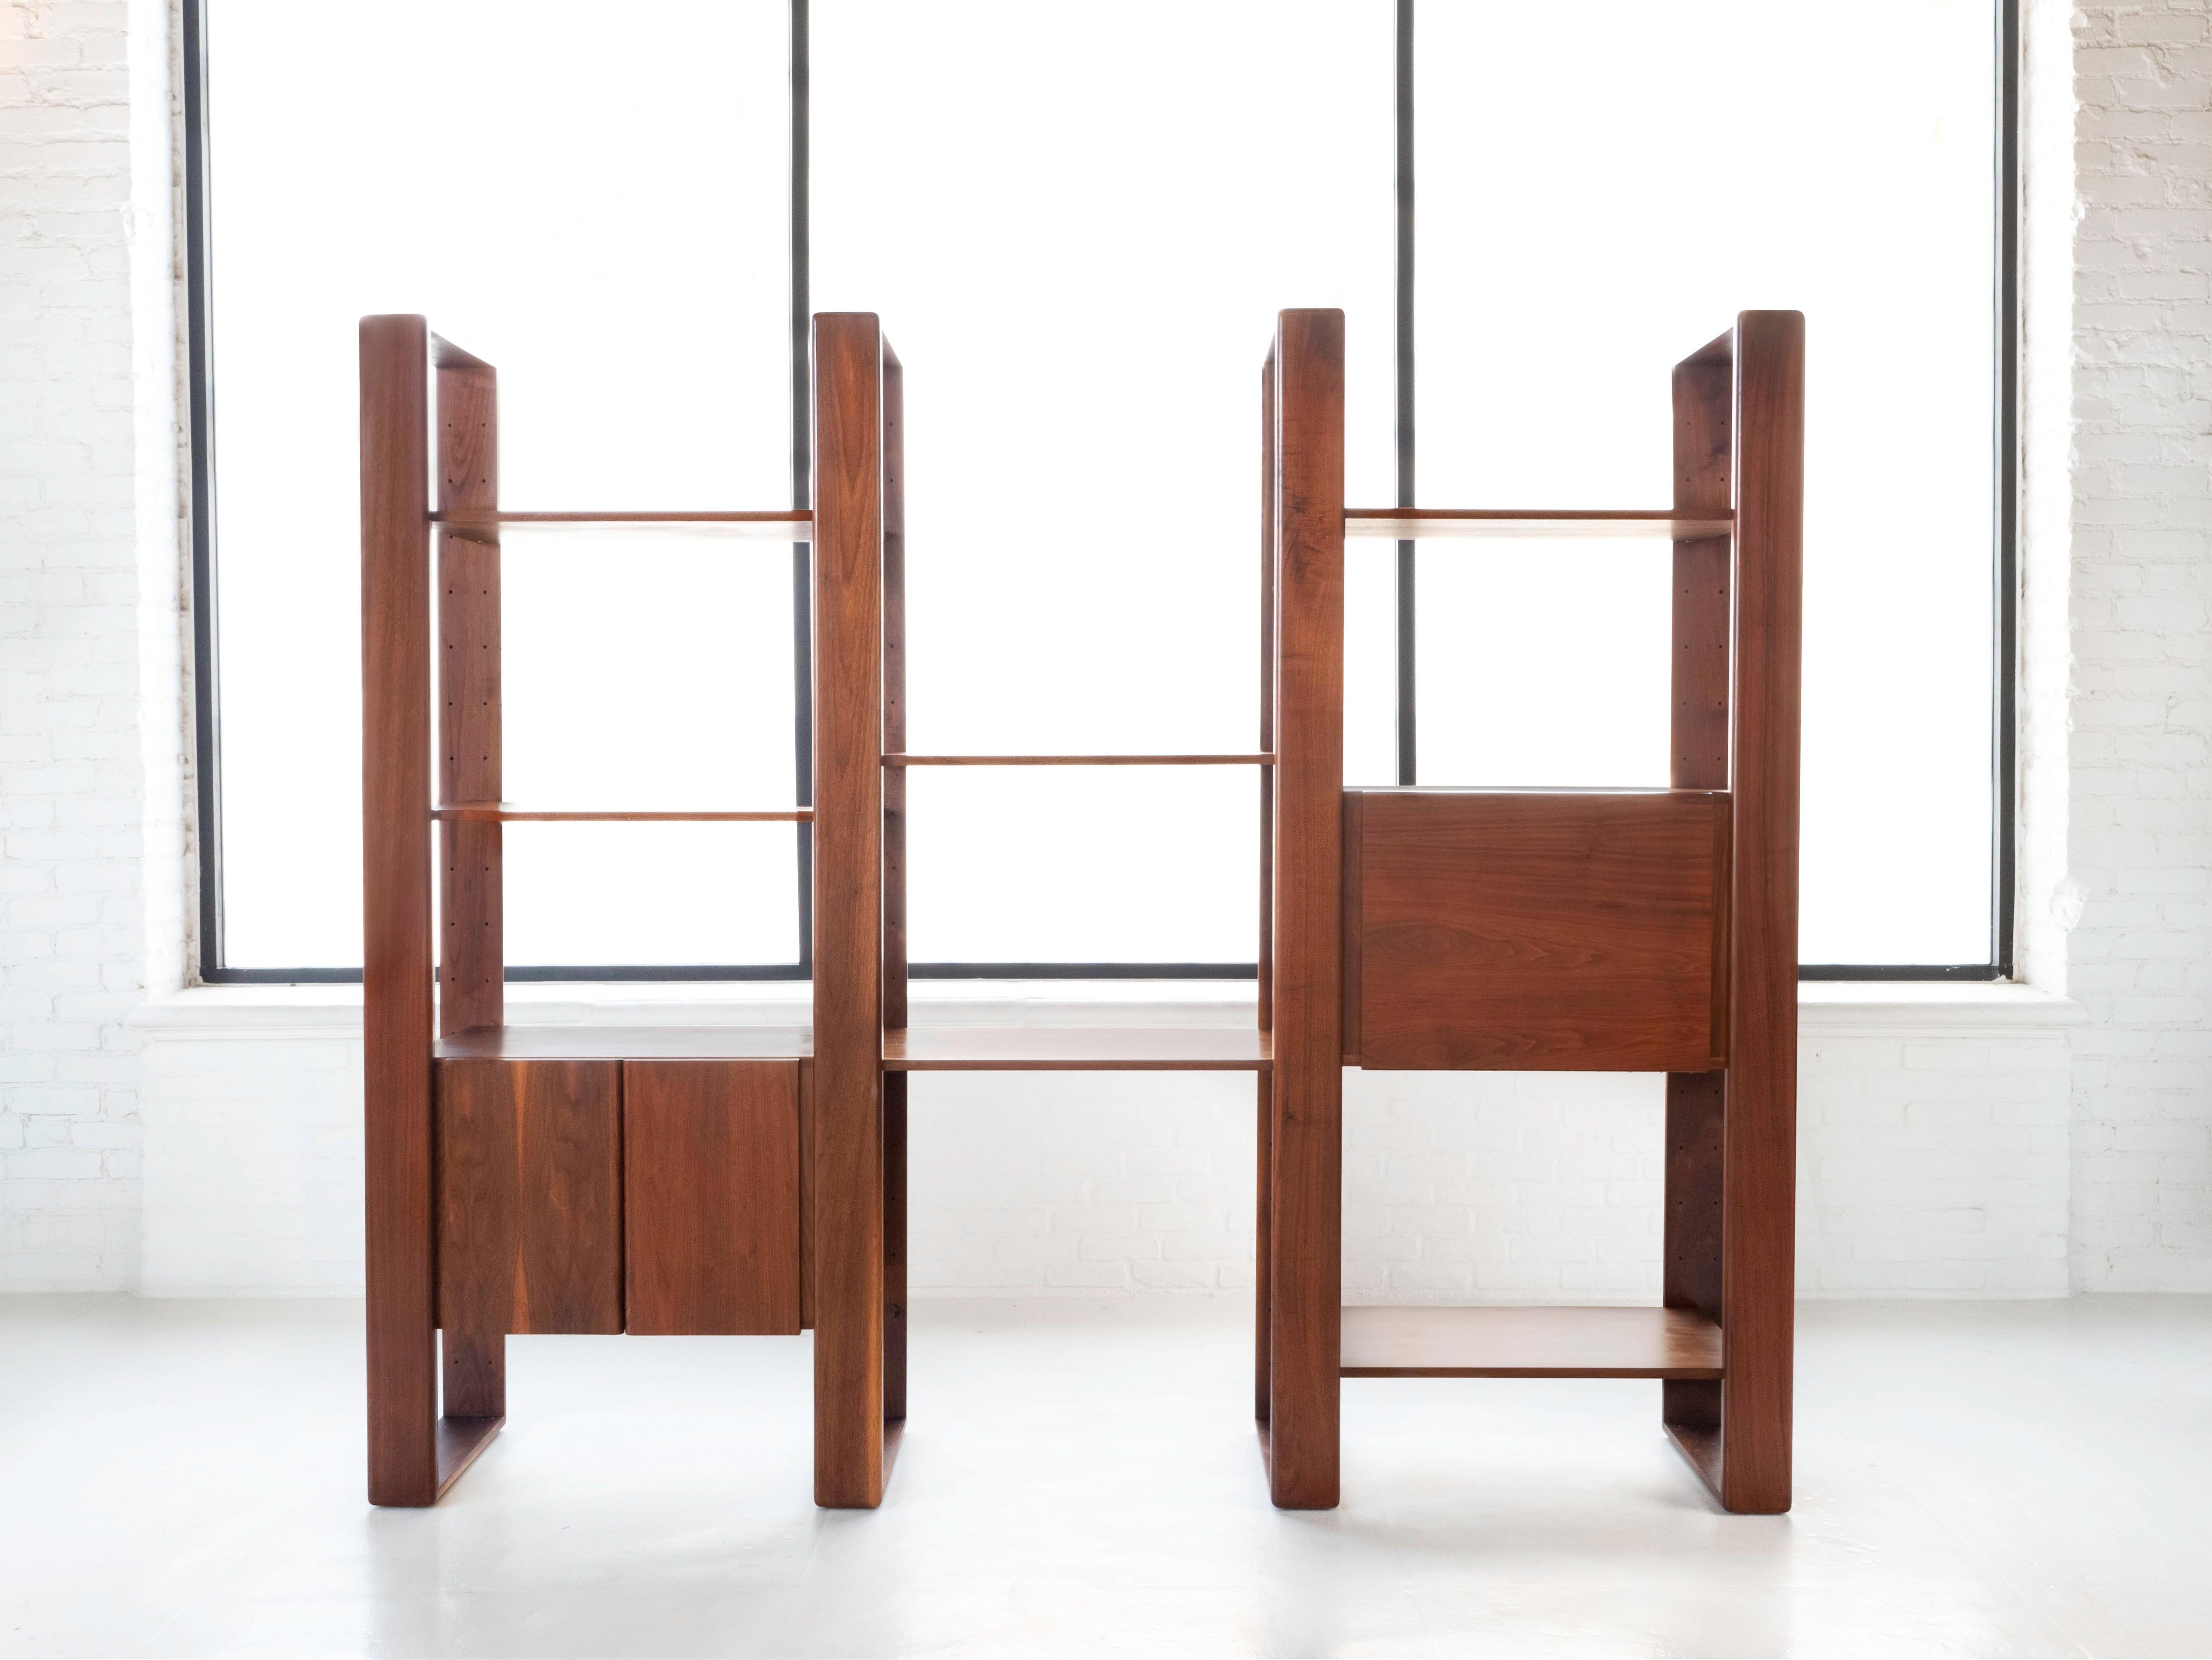 Late 20th Century Lou Hodges Three-Bay Wall Unit in Walnut for Generation 80, Circa 1970's